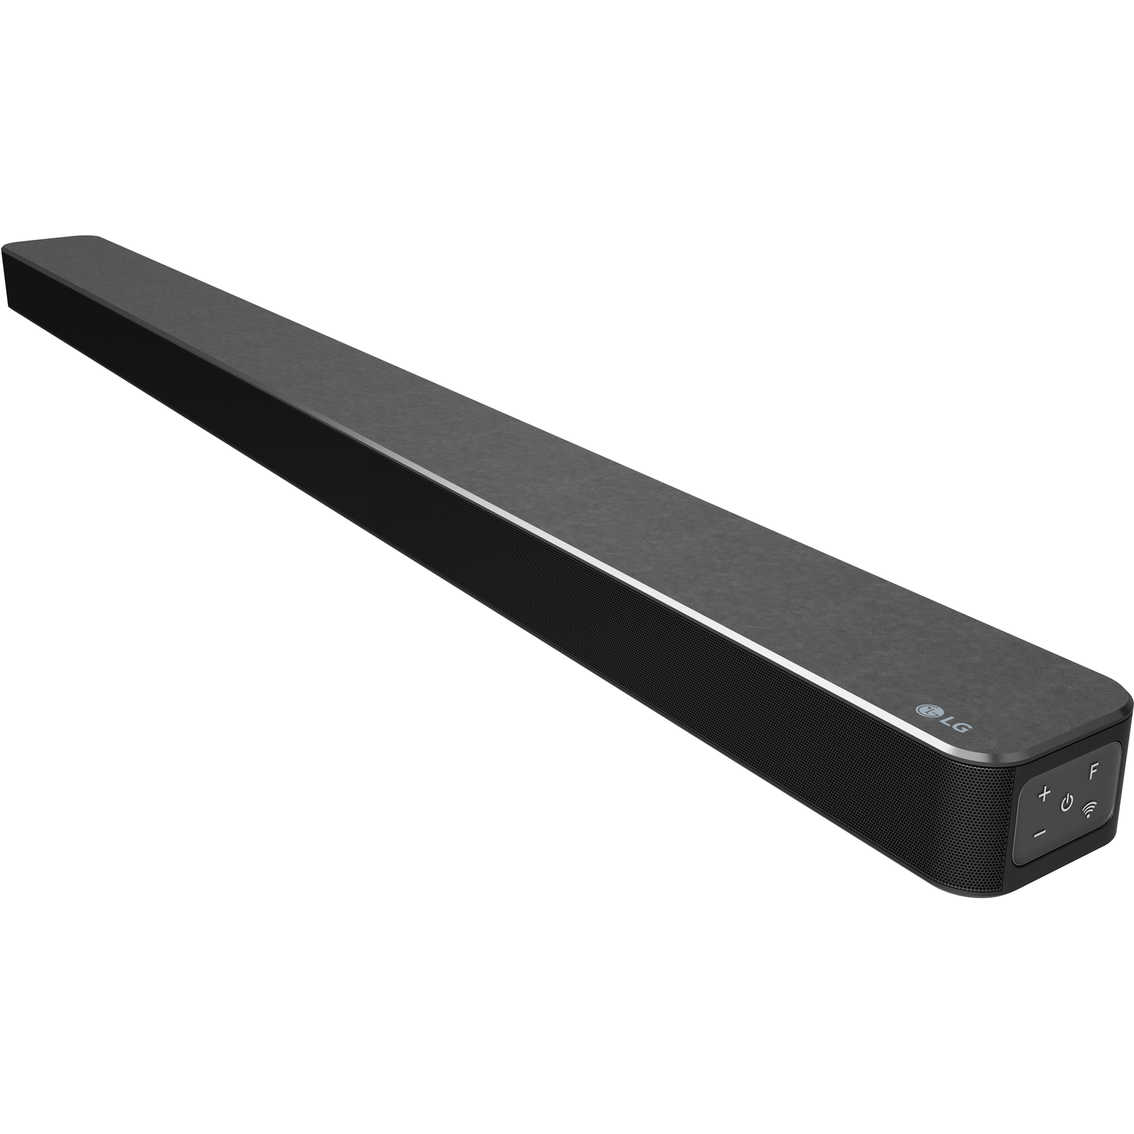 LG SN6Y 3.1 Channel 420 Watt High Res Audio Sound Bar with DTS Virtual:X - Image 4 of 10